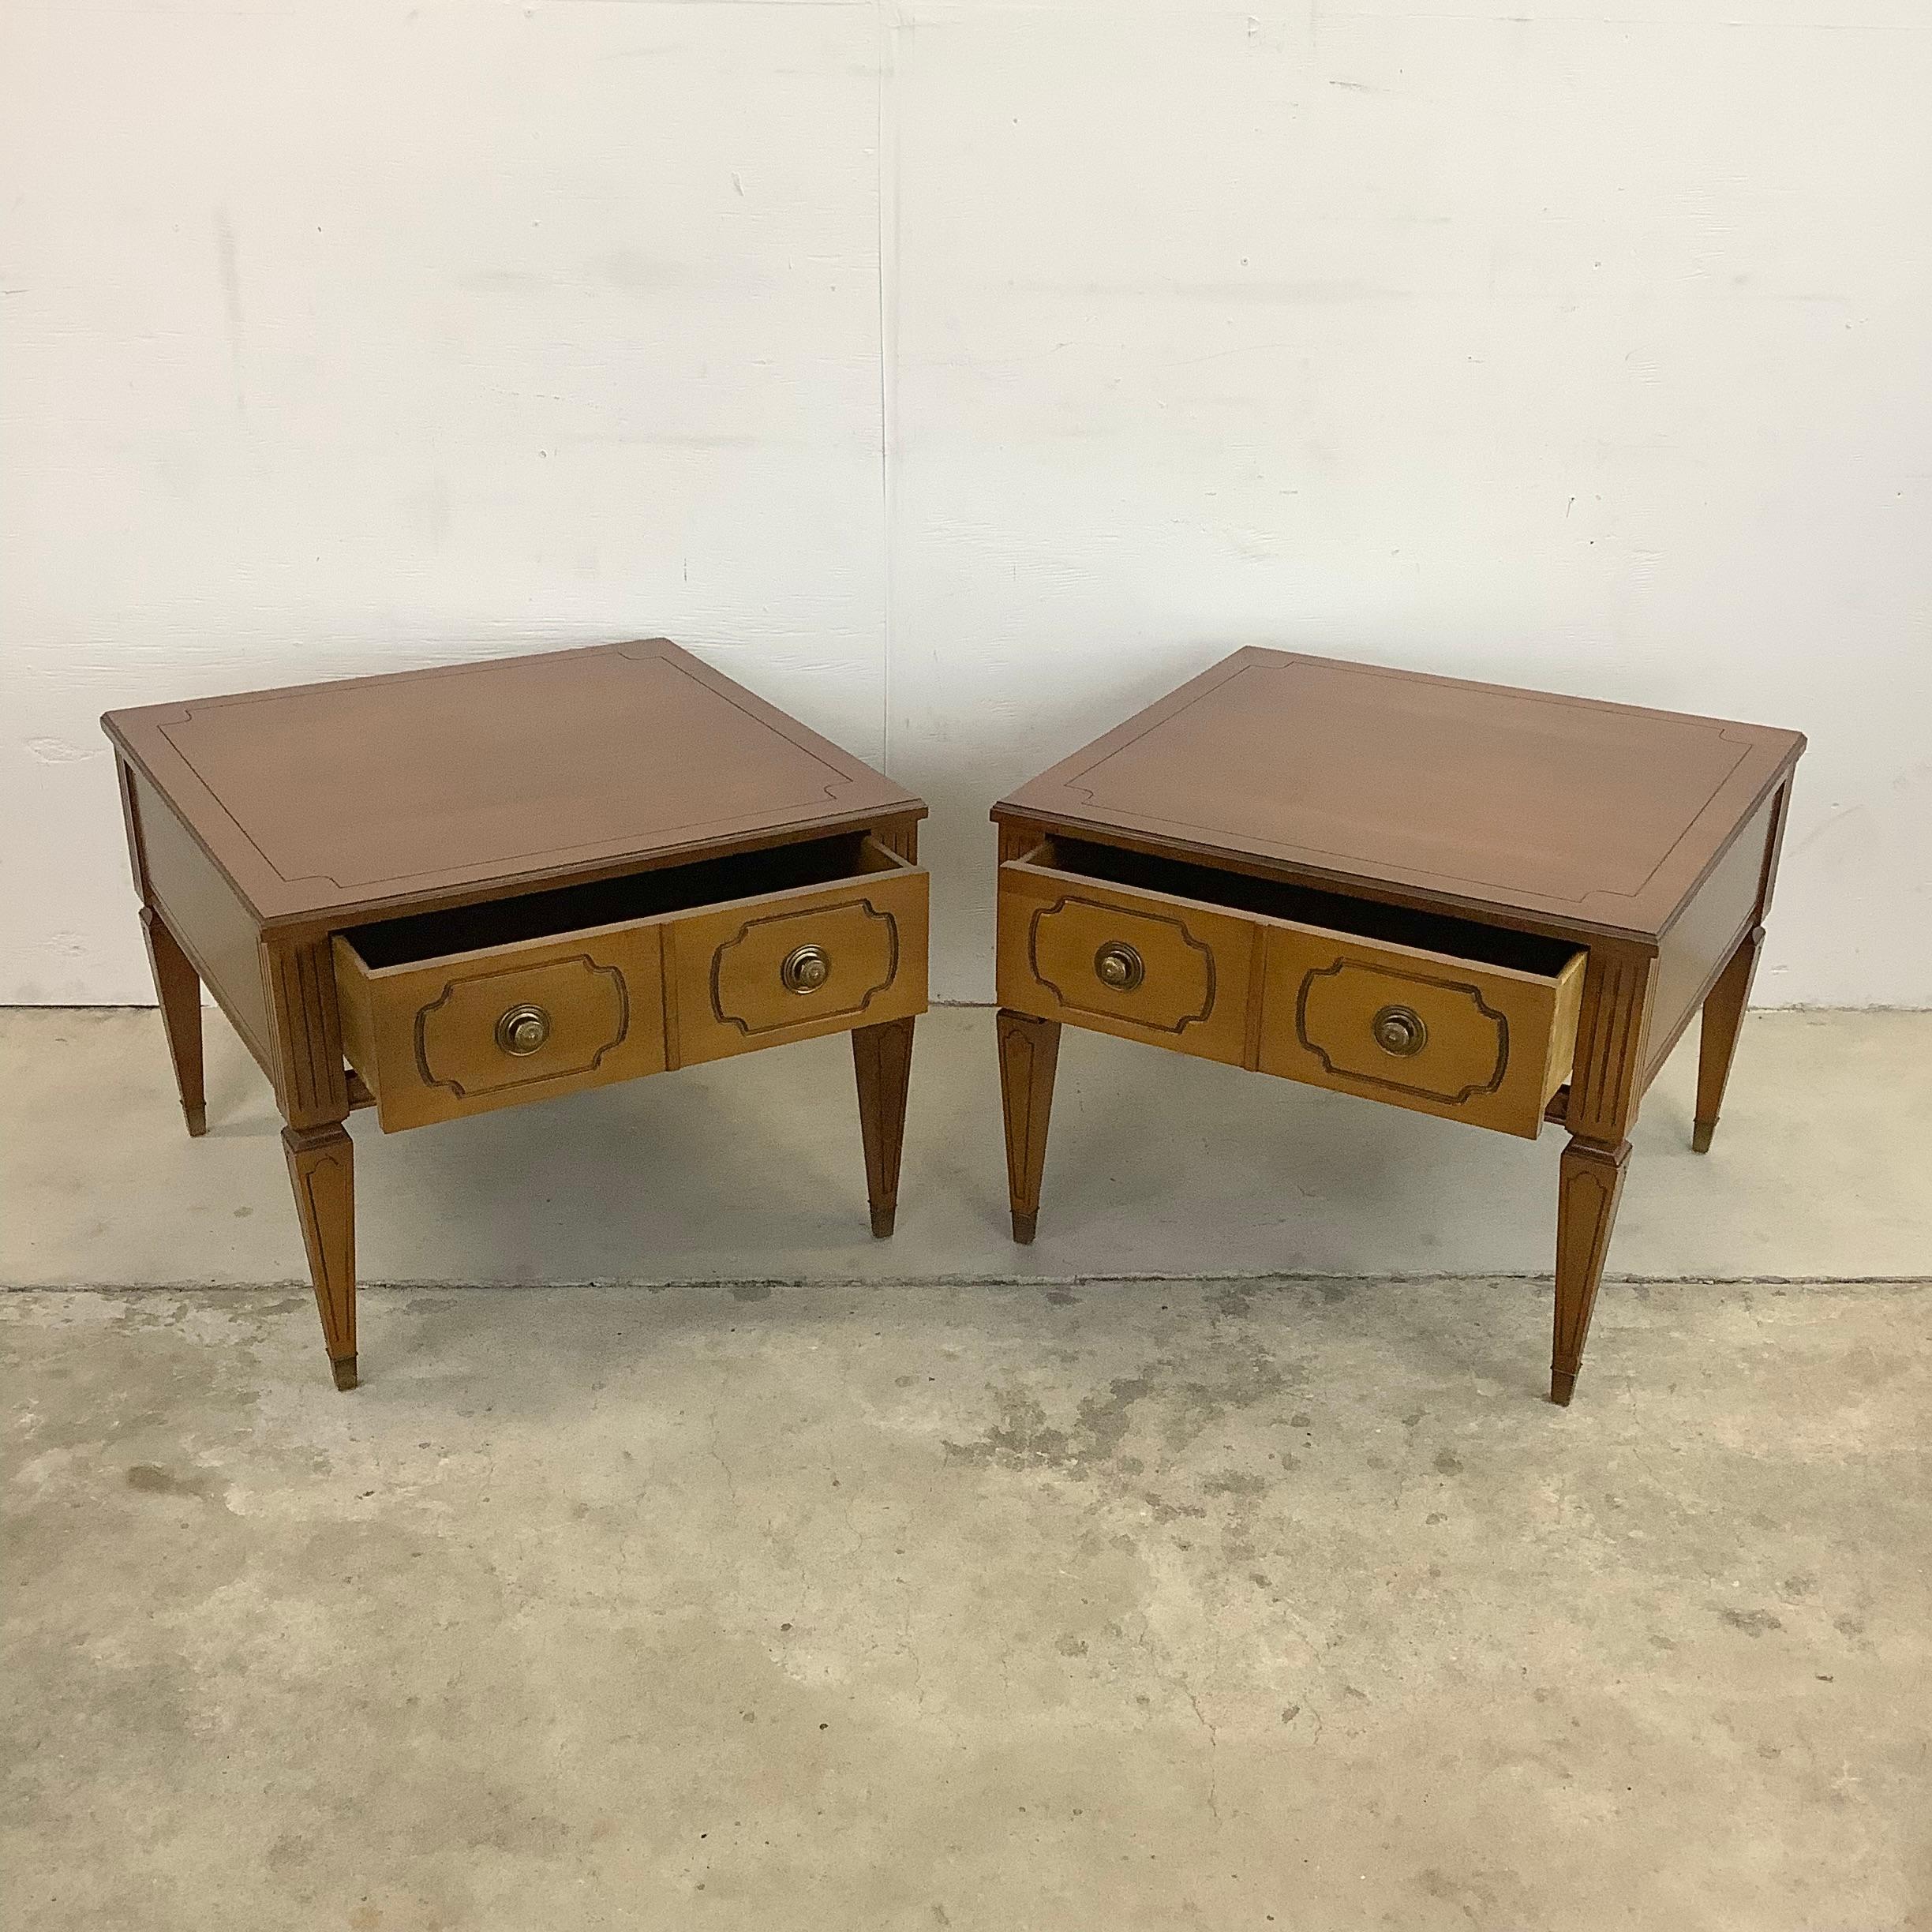 This pair of vintage end tables feature ornate tapered legs, decorative drawer fronts, and spacious single drawer design. The unique style and large square orientation of the pair makes for an excellent addition to any interior as a set of lamp